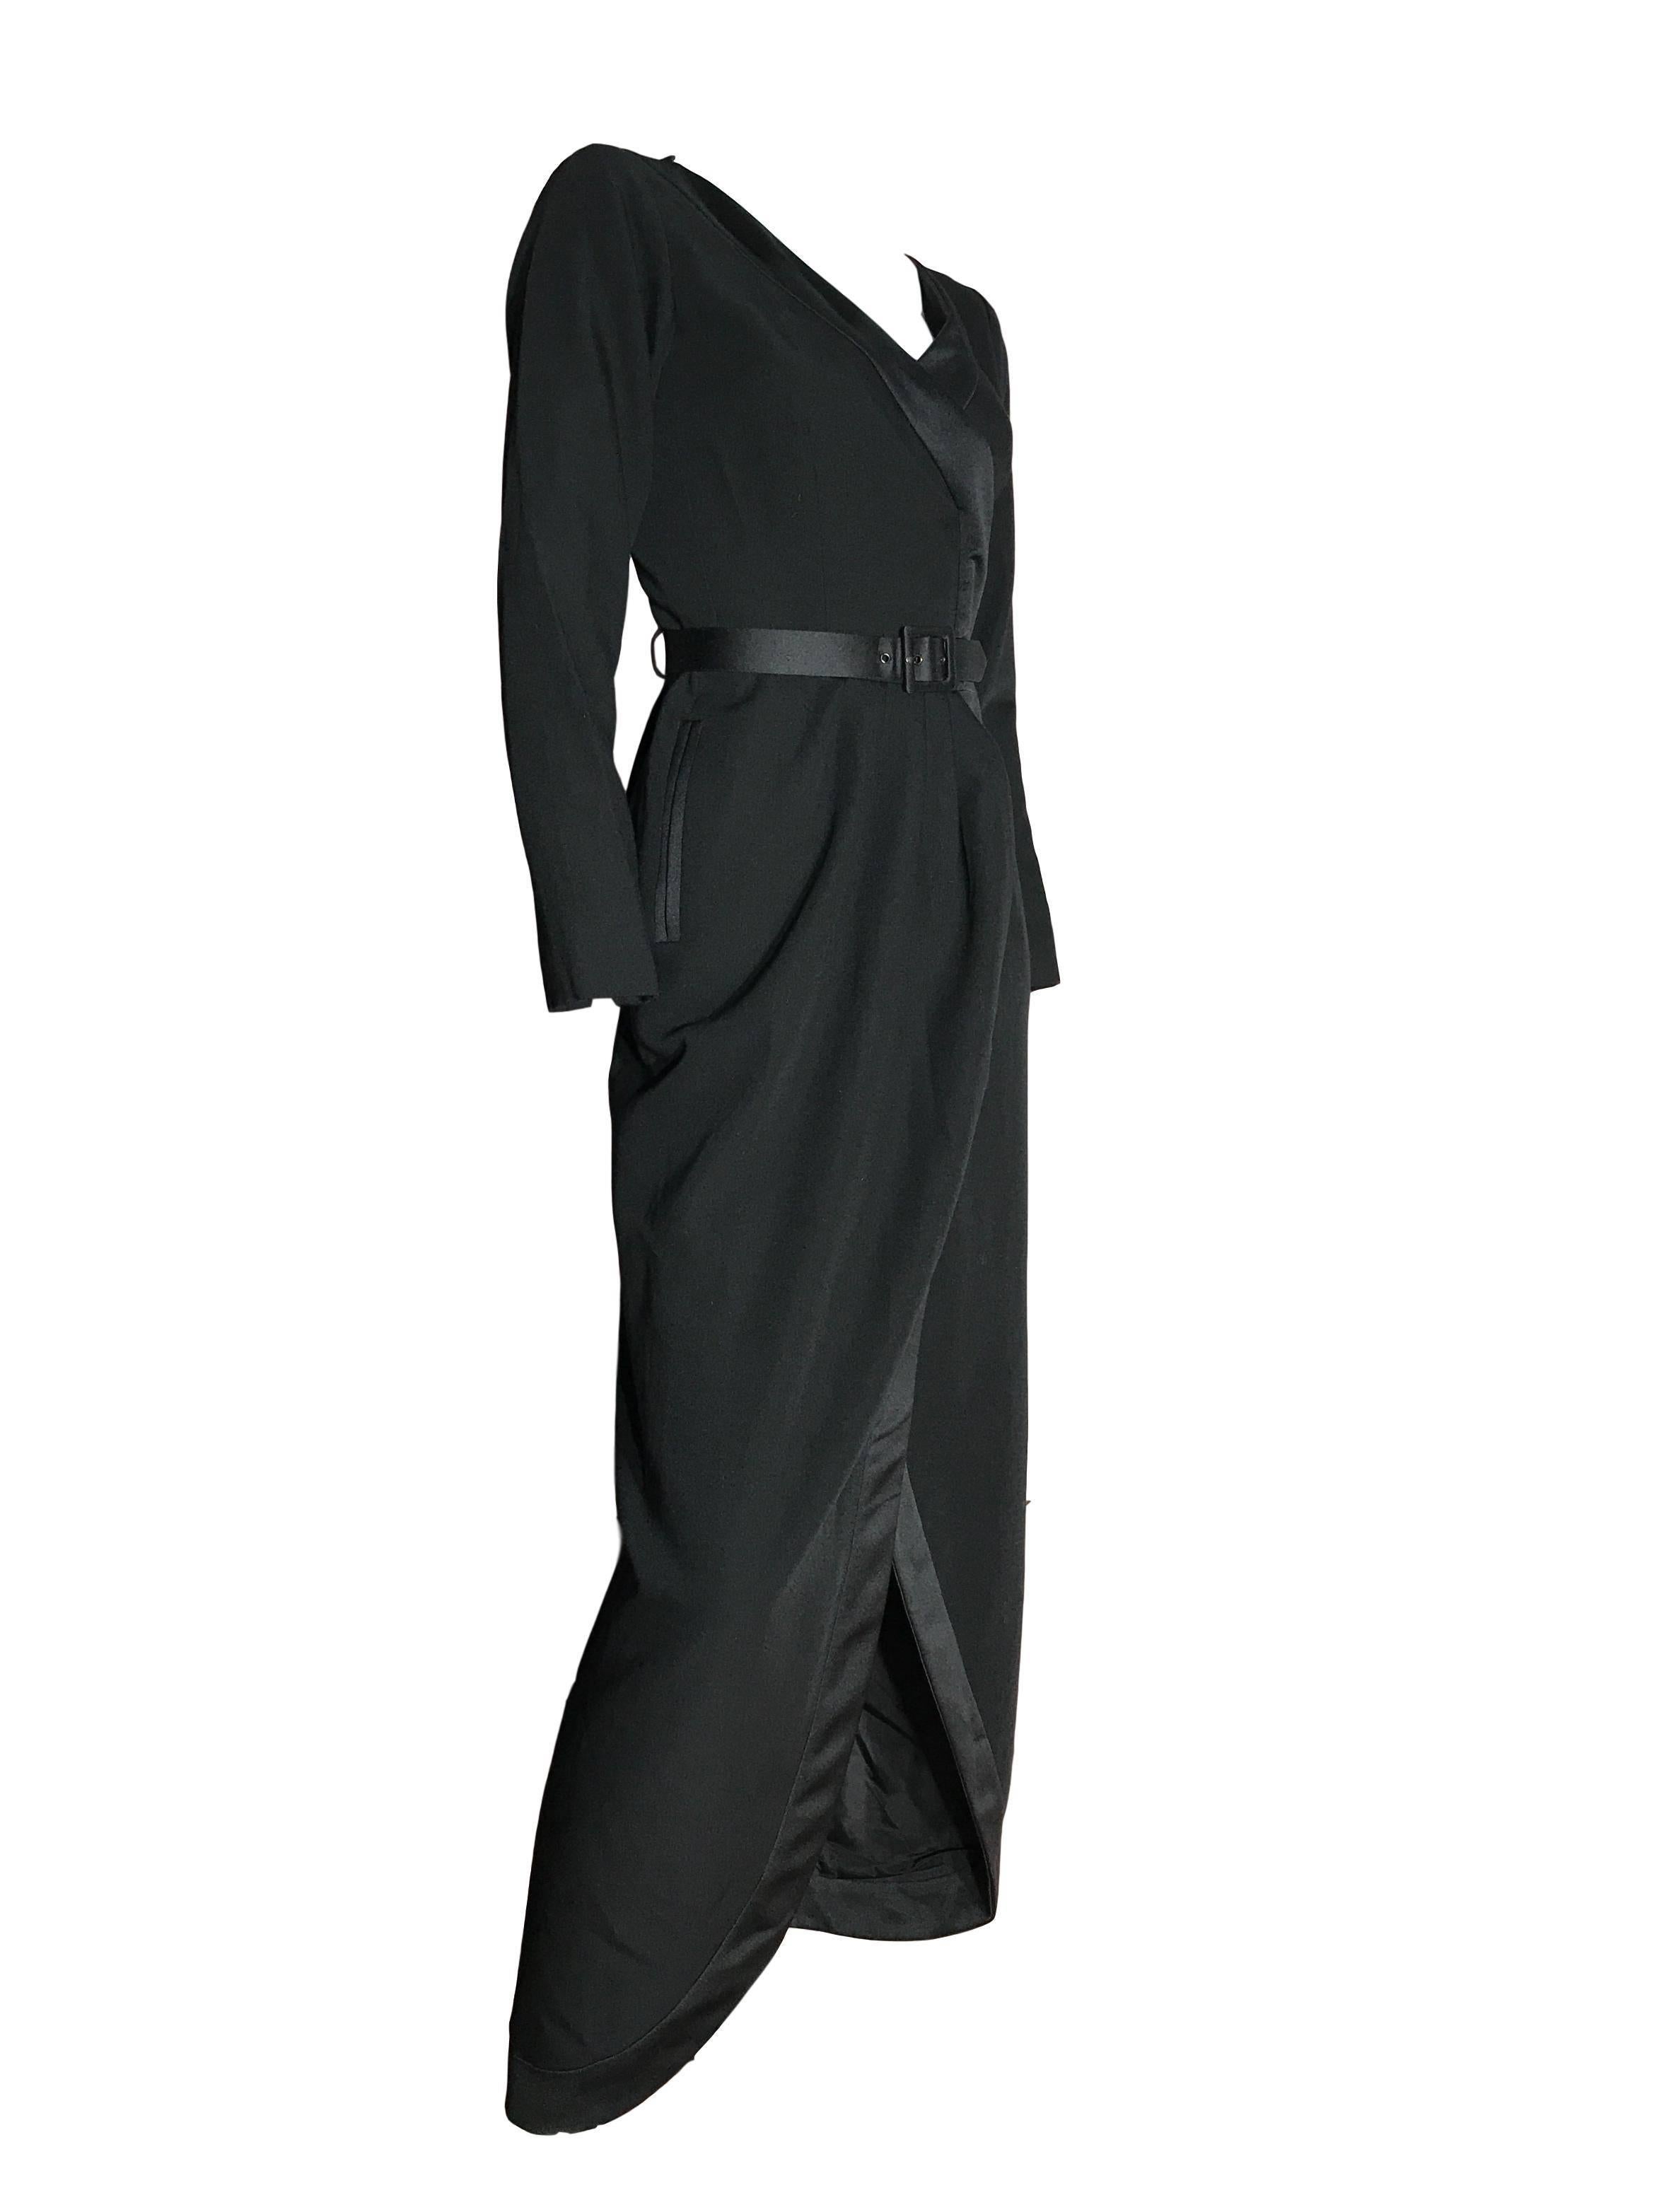 YSL Rive Gauche 100% wool black Tux Dress, with satin trim and belt. Maxi length with tulip front feature on the skirt. 

In excellent condition 

Labelled a 36. Measures 32 bust, 24 waist and 58 inches length.